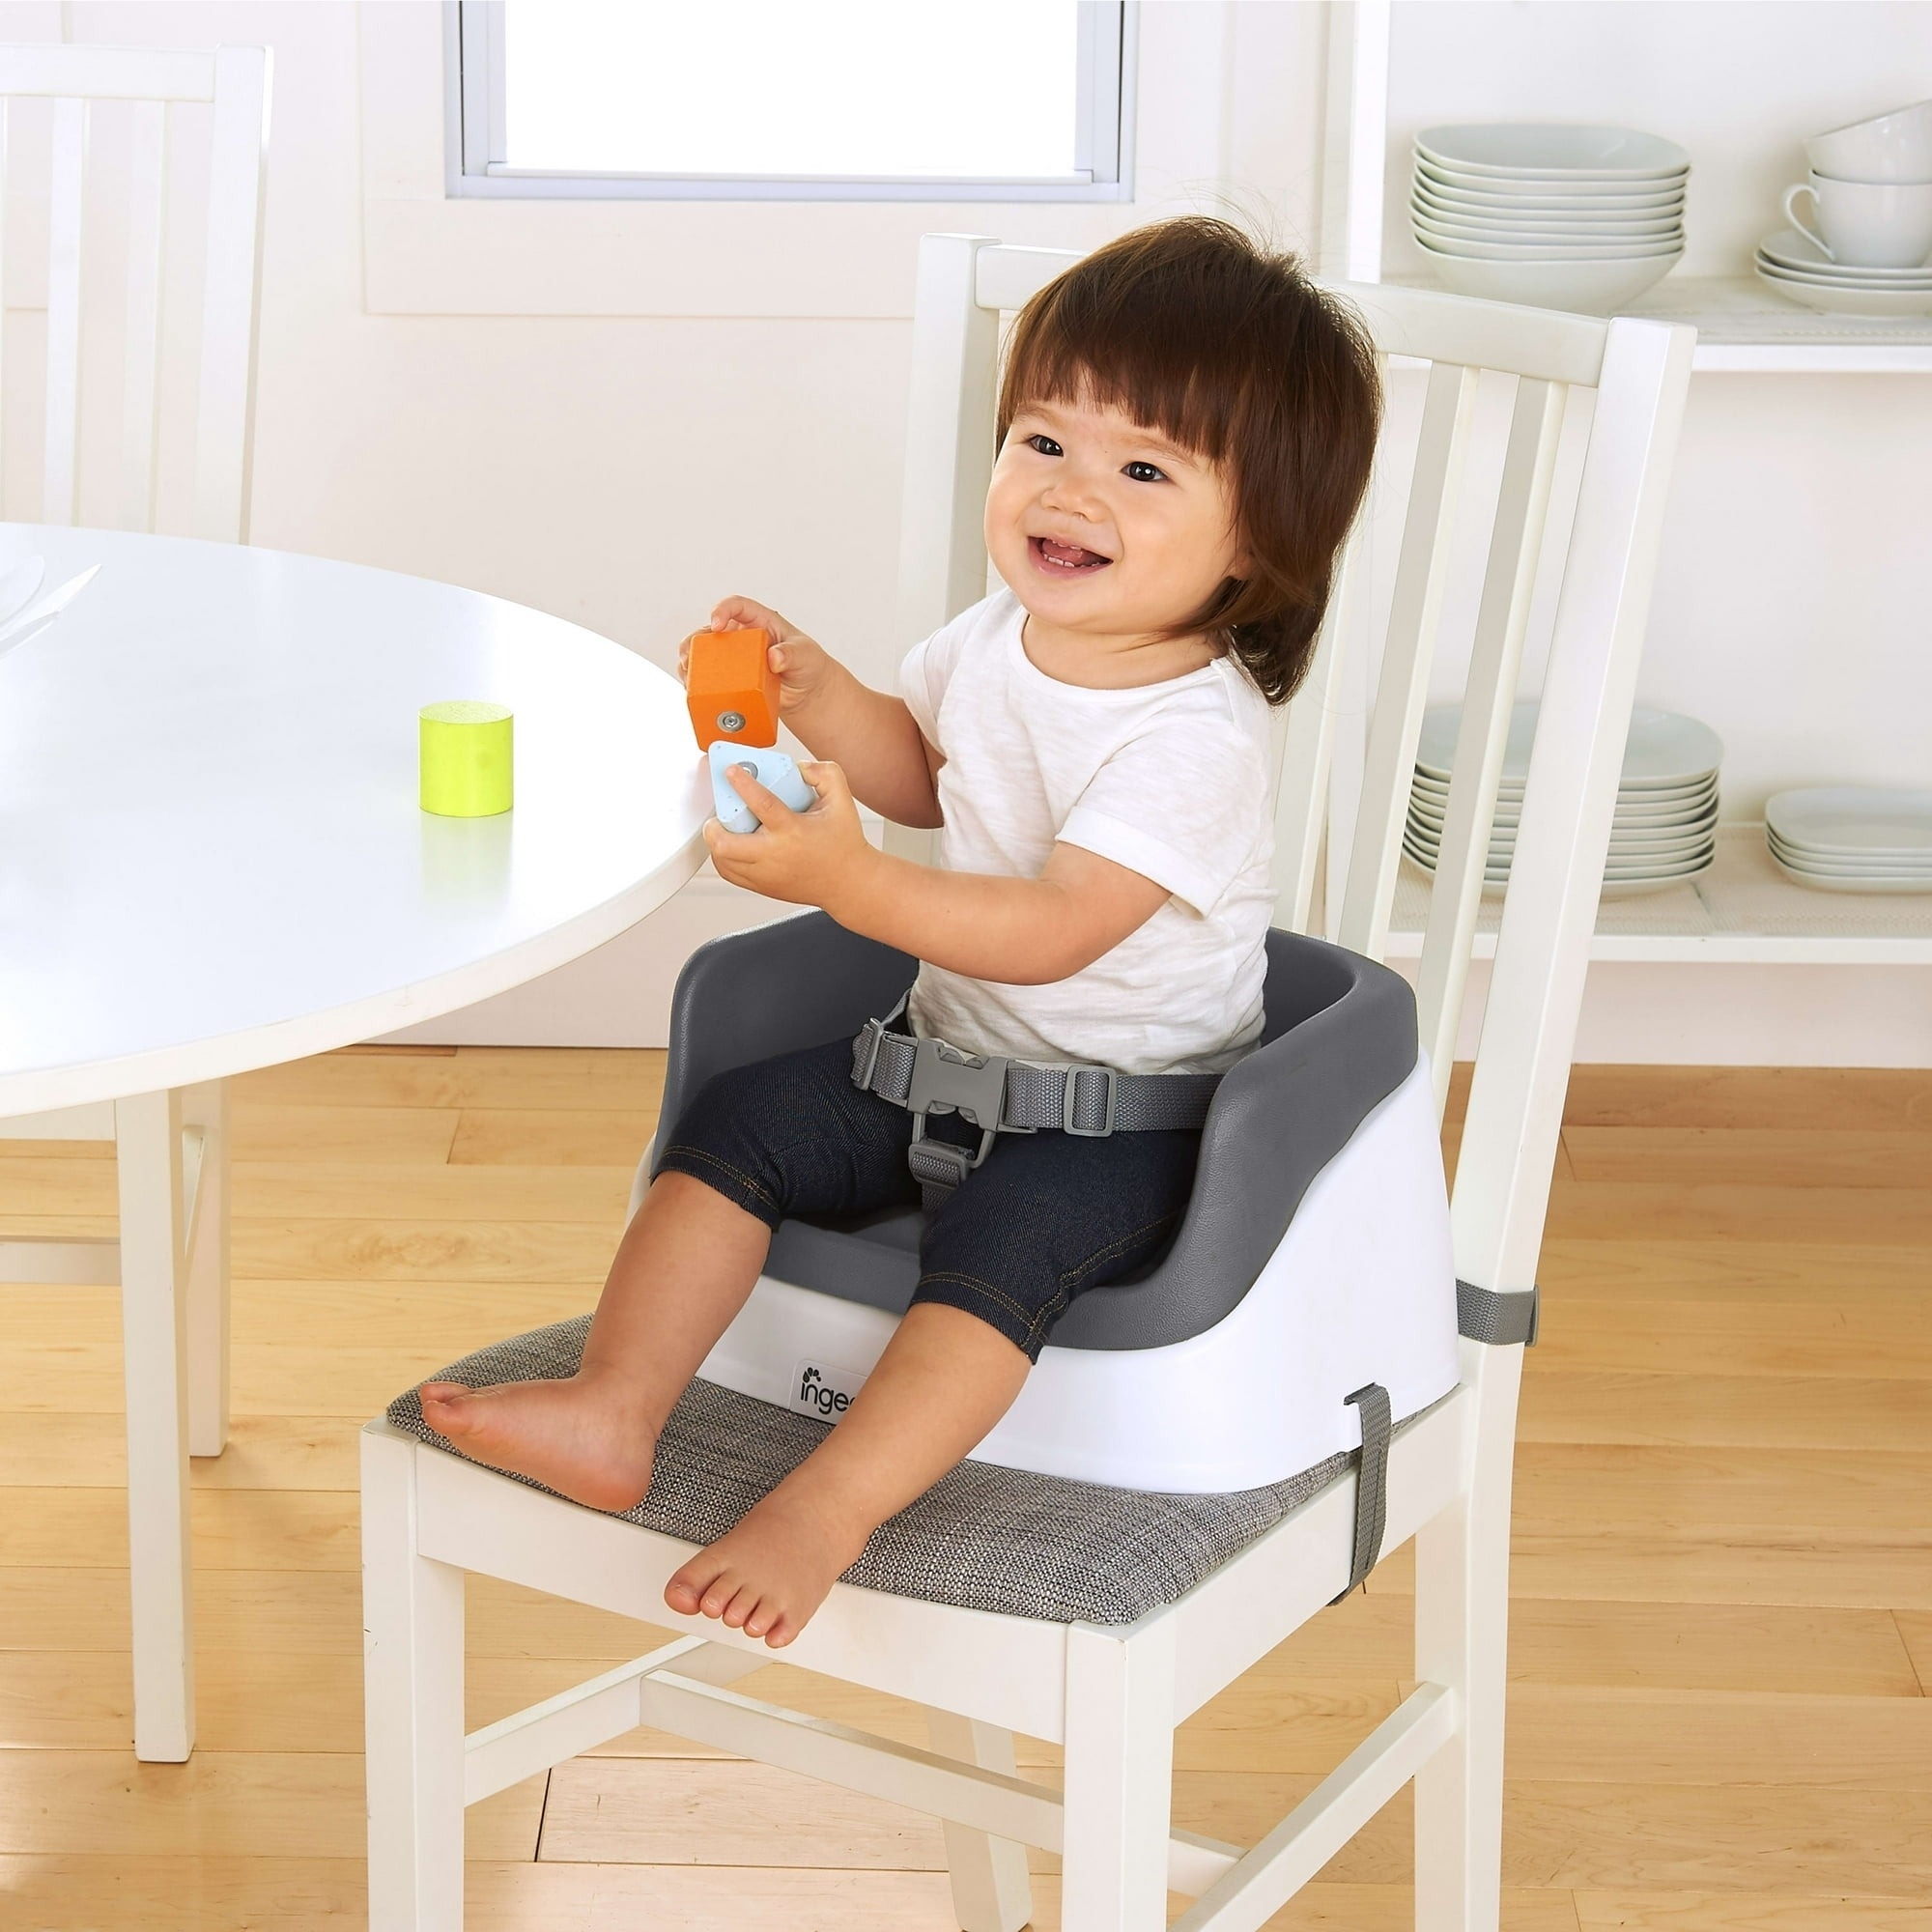 Child sits in a booster seat